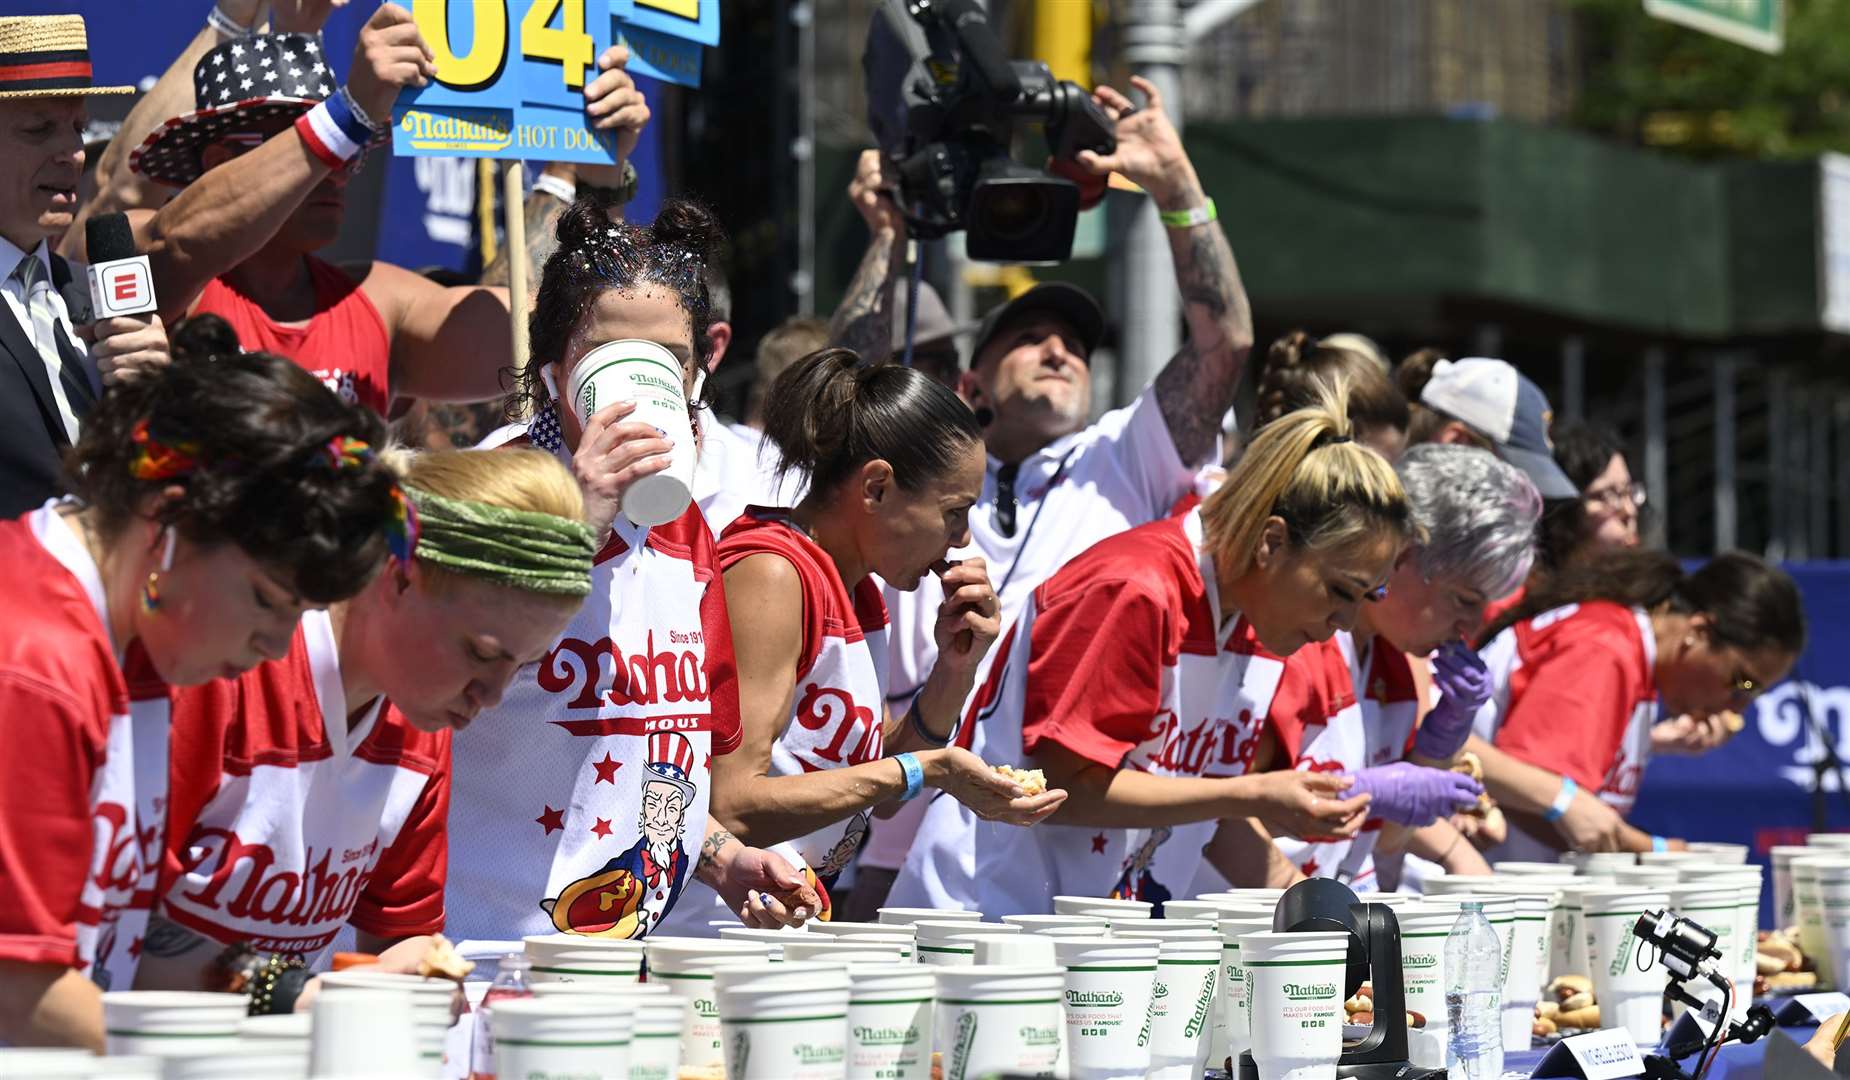 Female contestants participate in the competition in Coney Island (Major League Eating/PA)